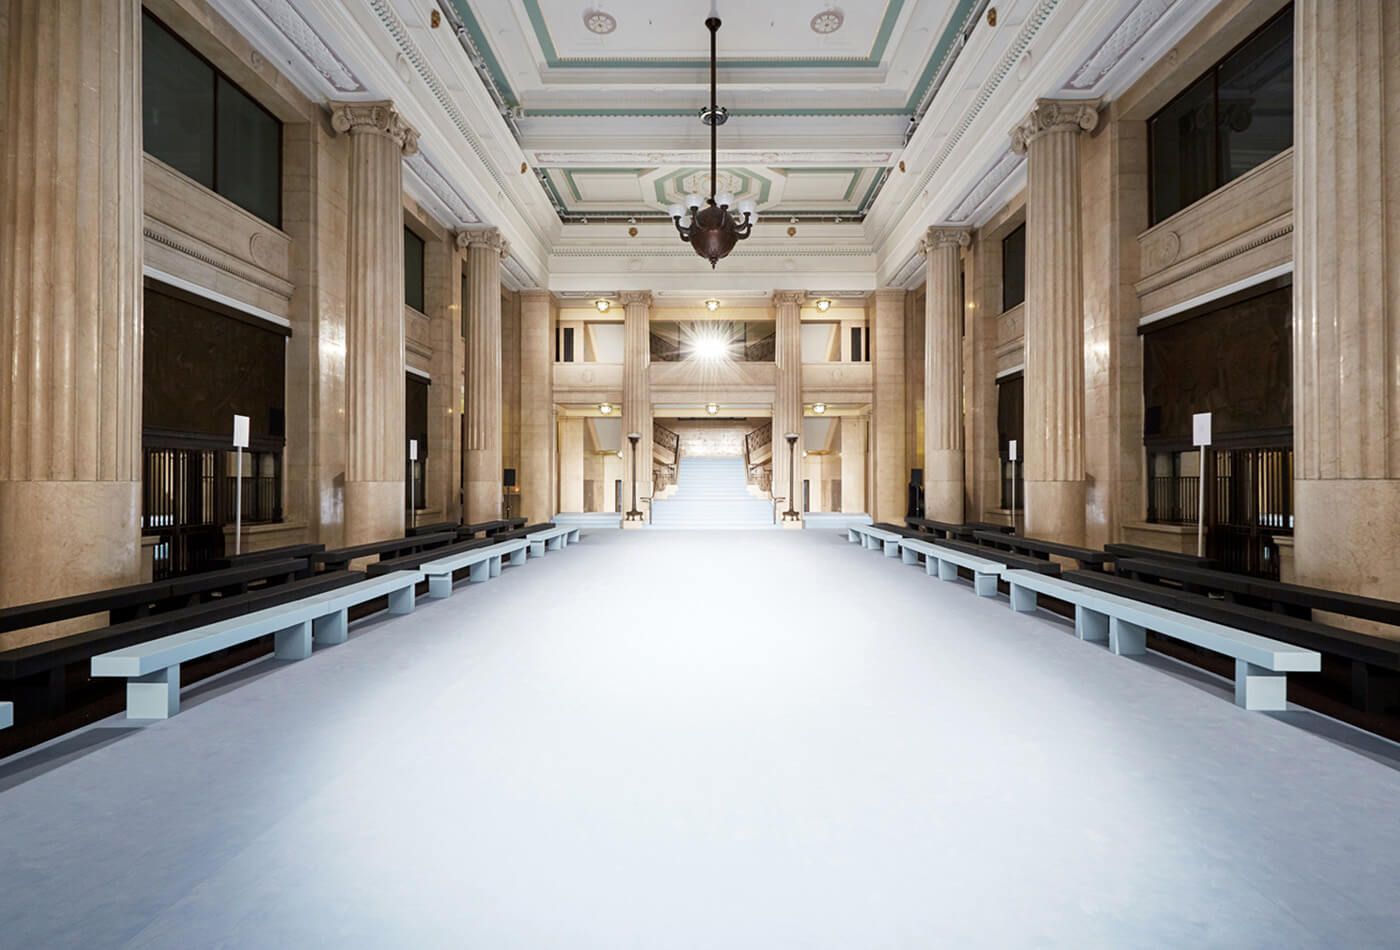 Long white runway with extremely high ceilings, greek columns and seating along each side